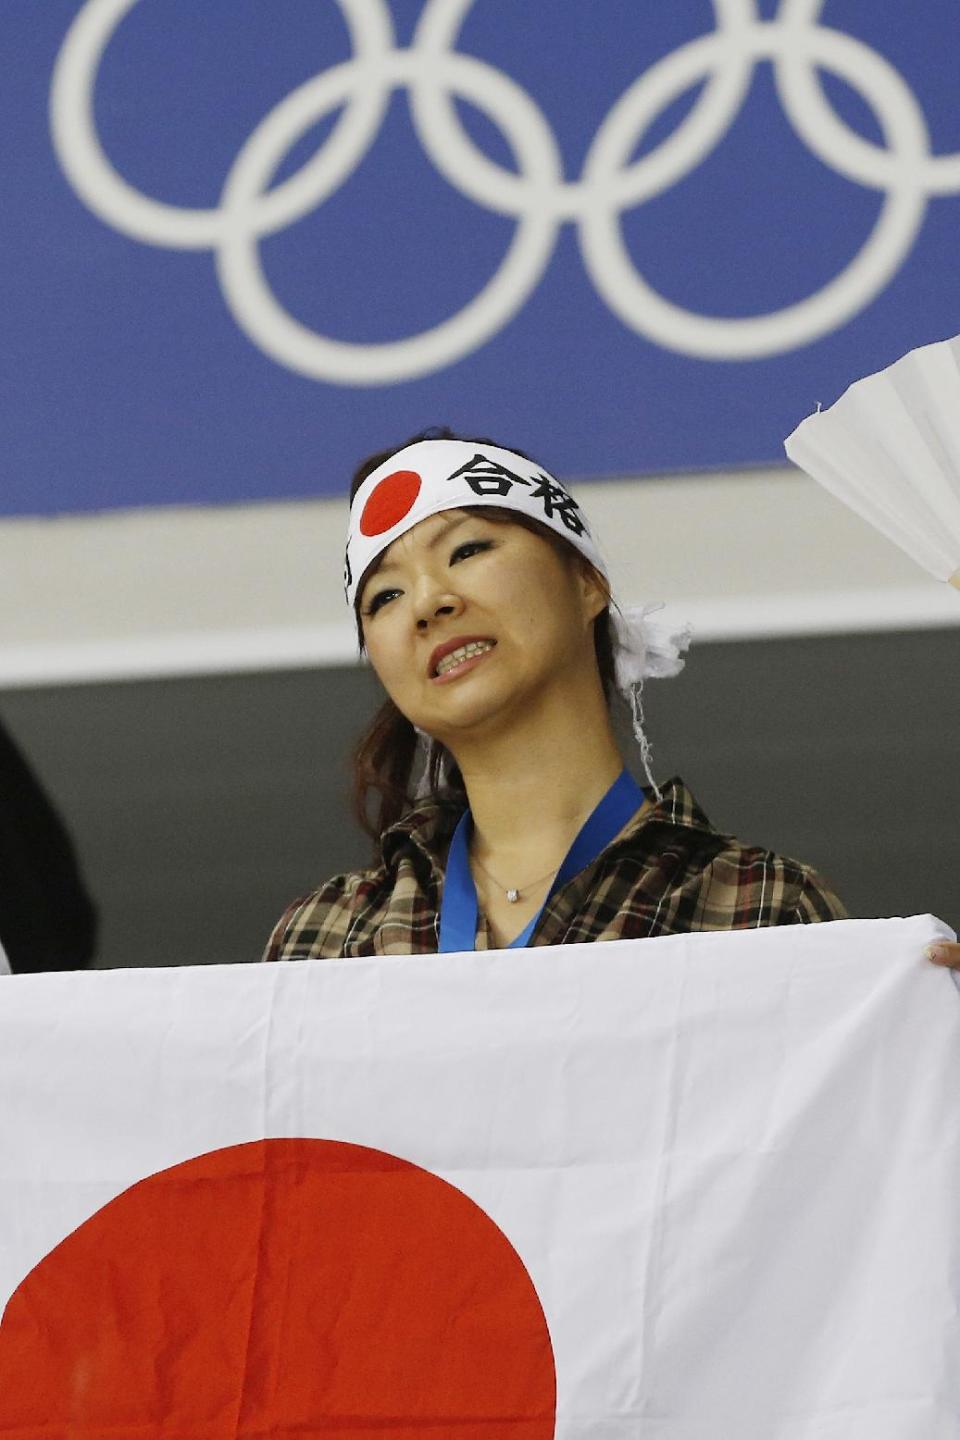 A Japanese fan reacts to the 4-0 loss to Germany during the 2014 Winter Olympics women's ice hockey game at Shayba Arena, Thursday, Feb. 13, 2014, in Sochi, Russia. (AP Photo/Petr David Josek)